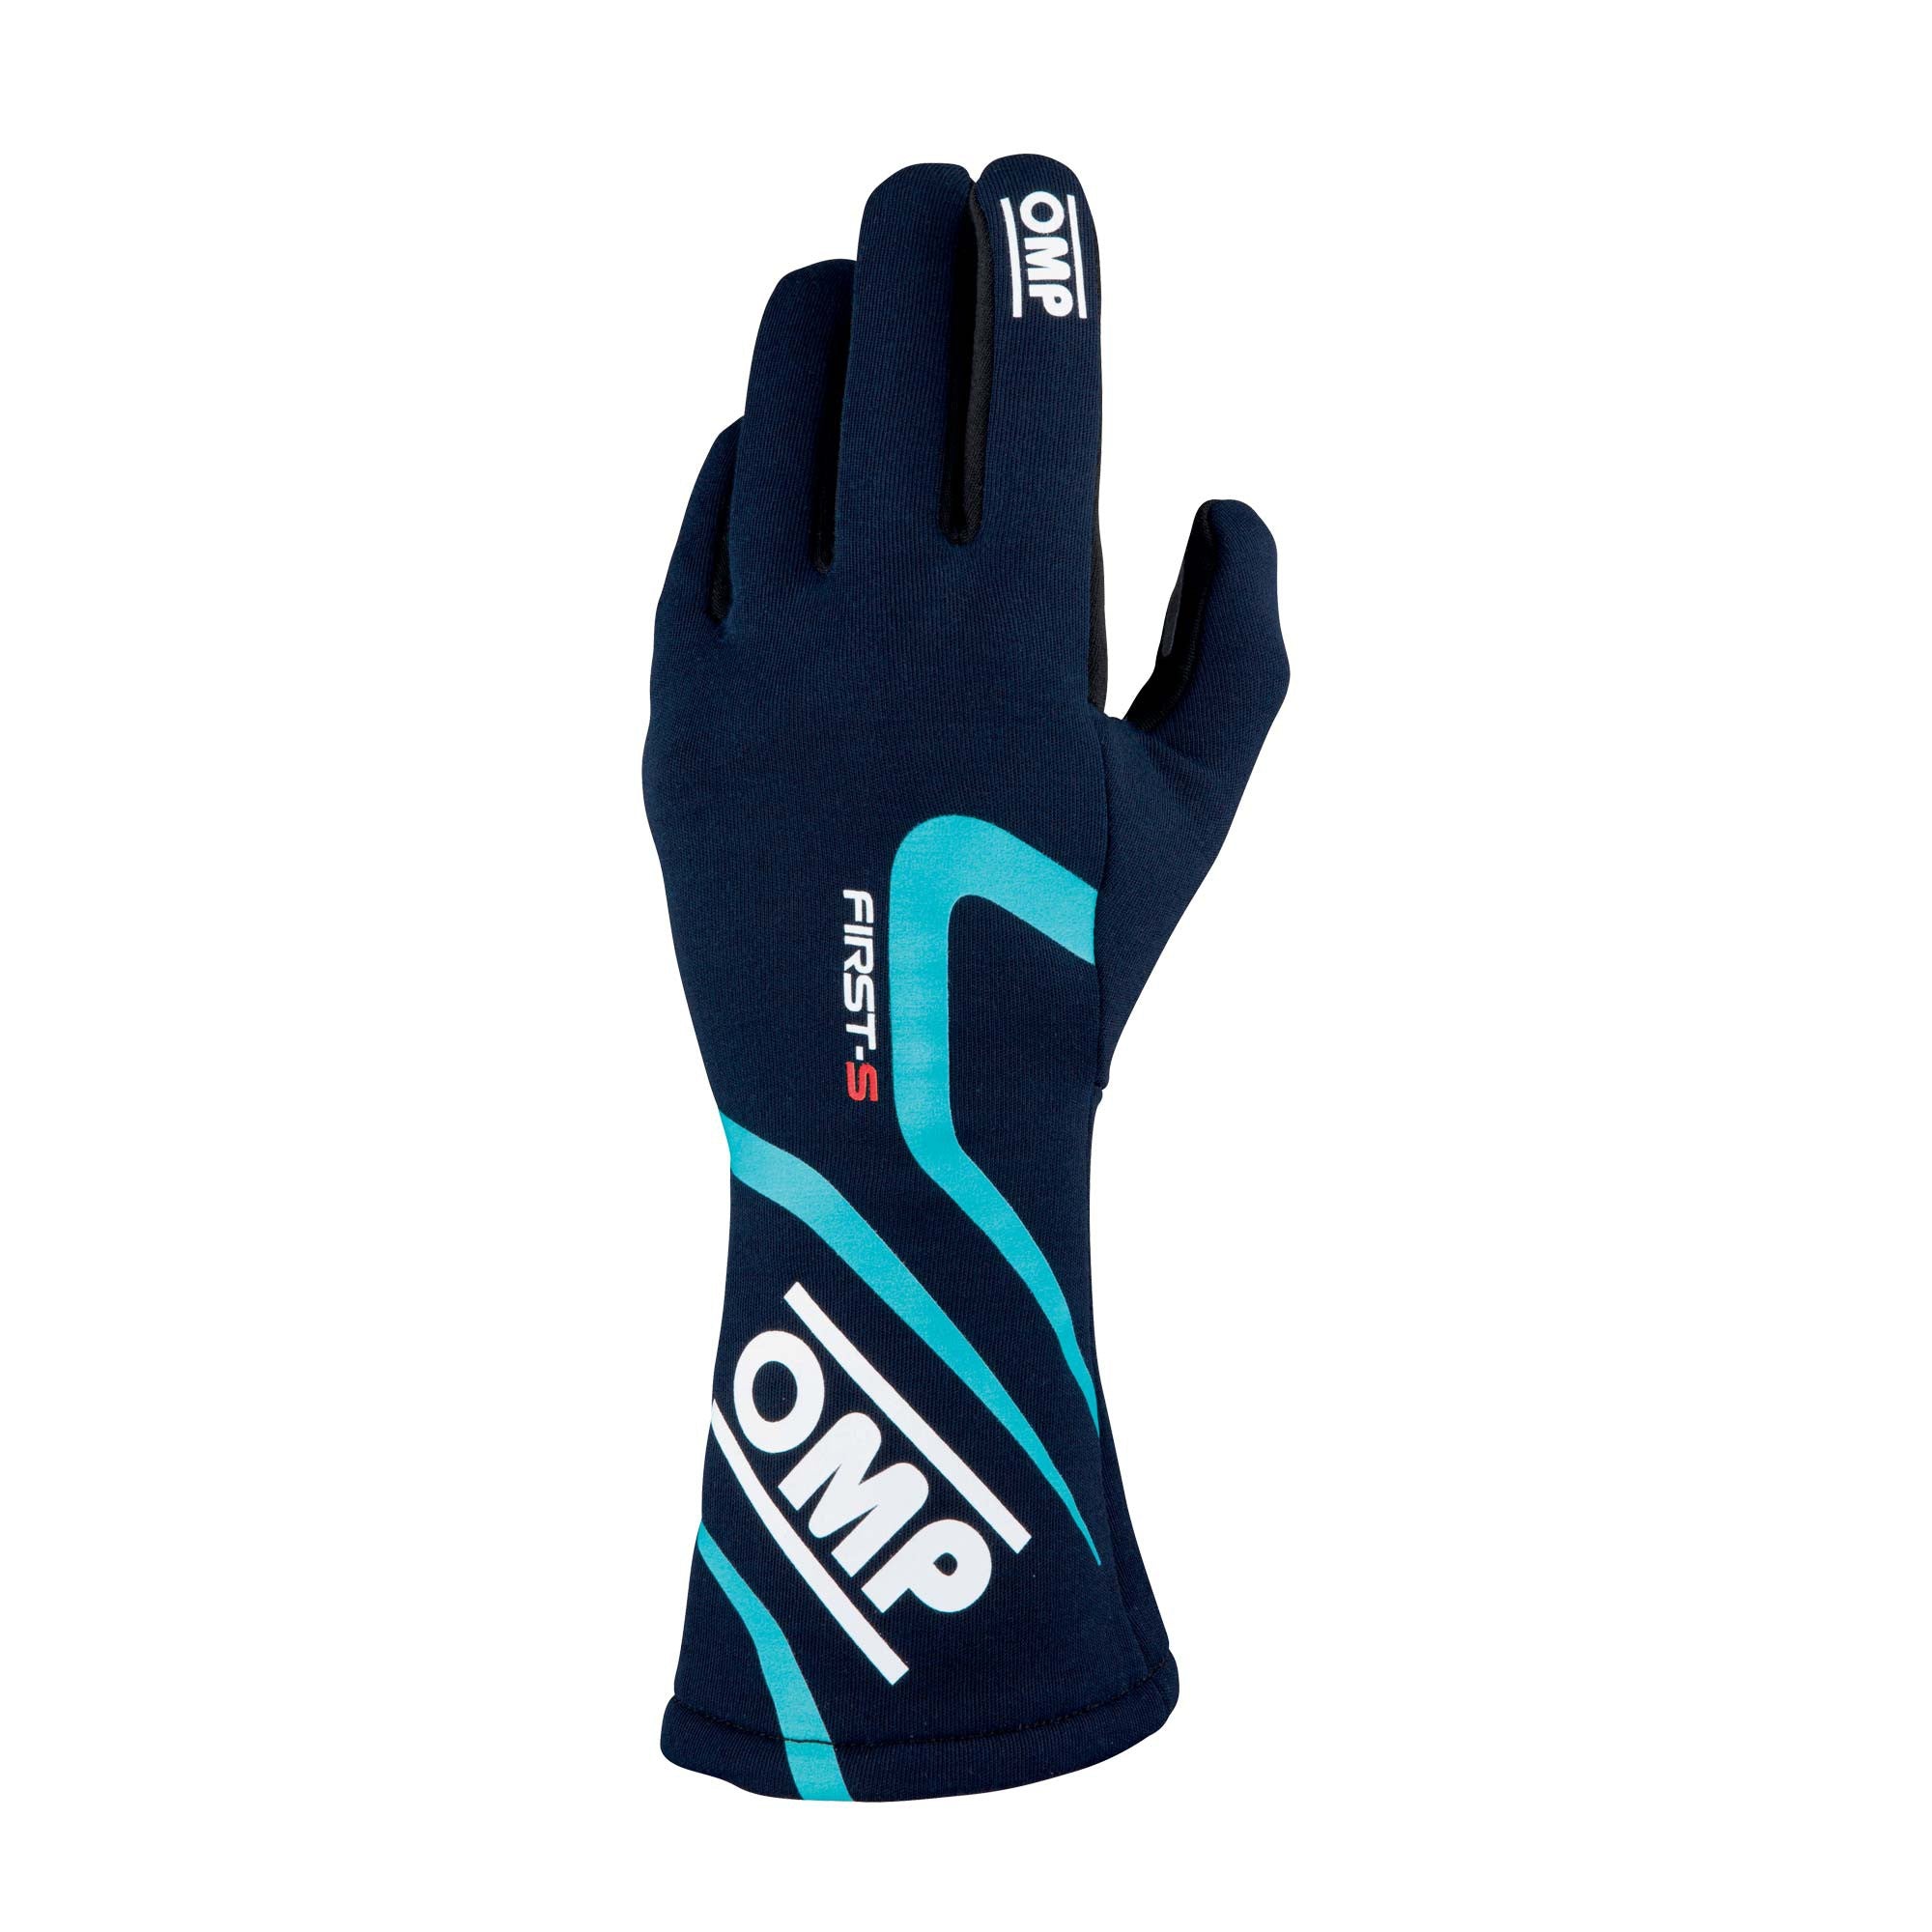 OMP IB0-0761-C01-248-S FIRST-S my2020 Racing gloves, FIA 8856-2018, navy blue/tiffany, size S Photo-0 